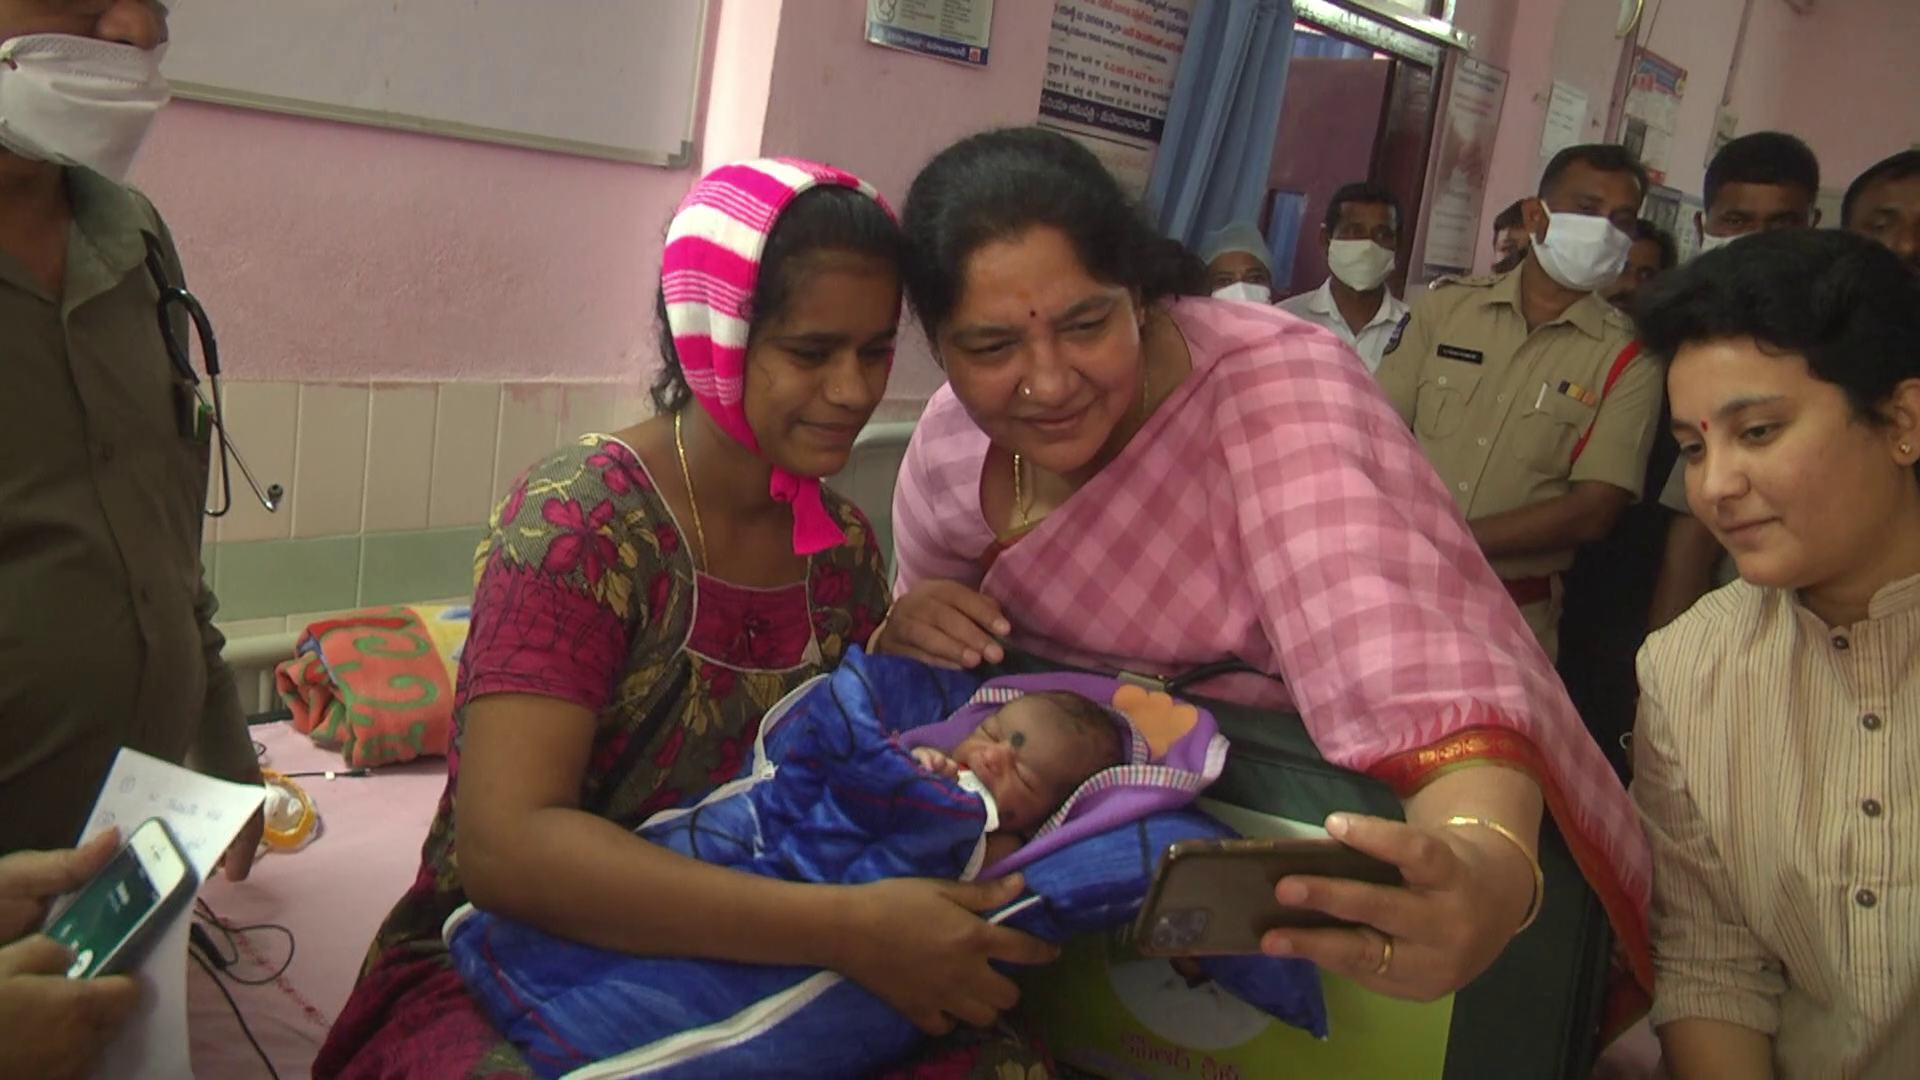 Minister taking selfie with mother and child